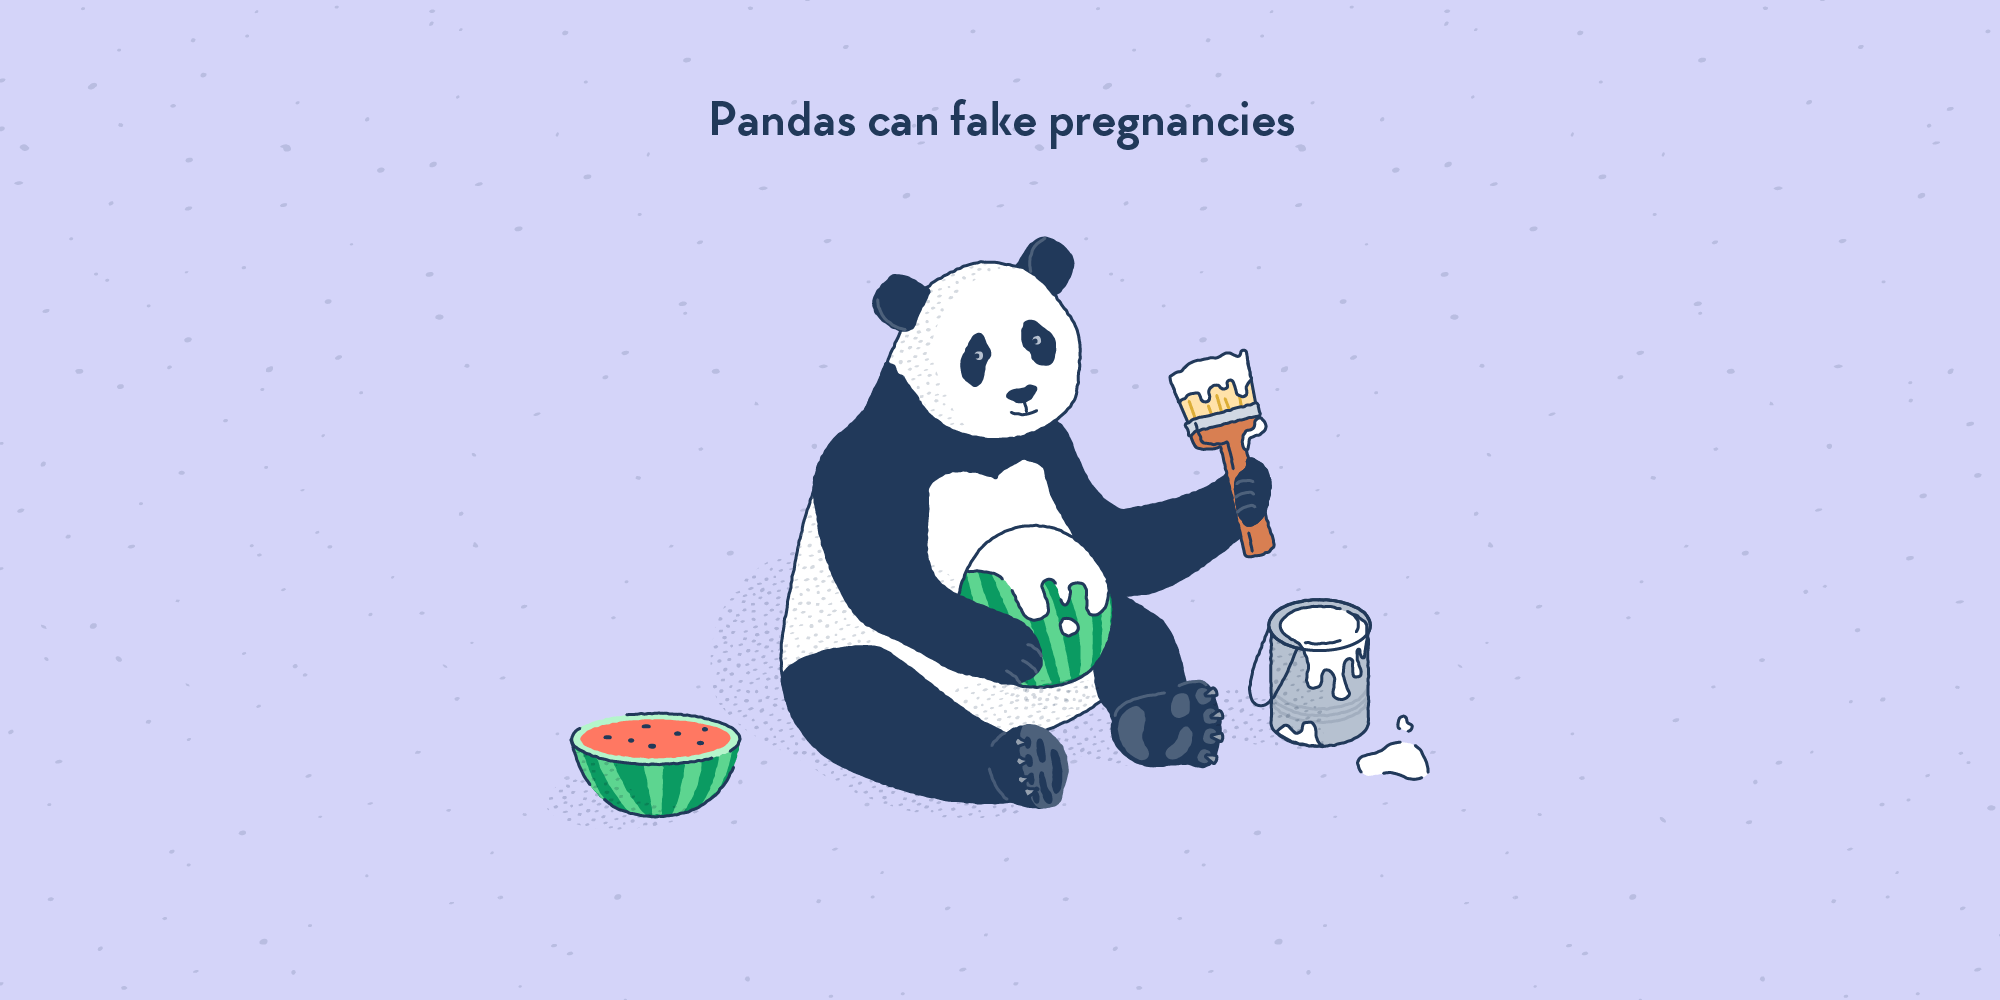 A panda painting a watermelon in white and placing it on her belly to pretend it’s bigger.